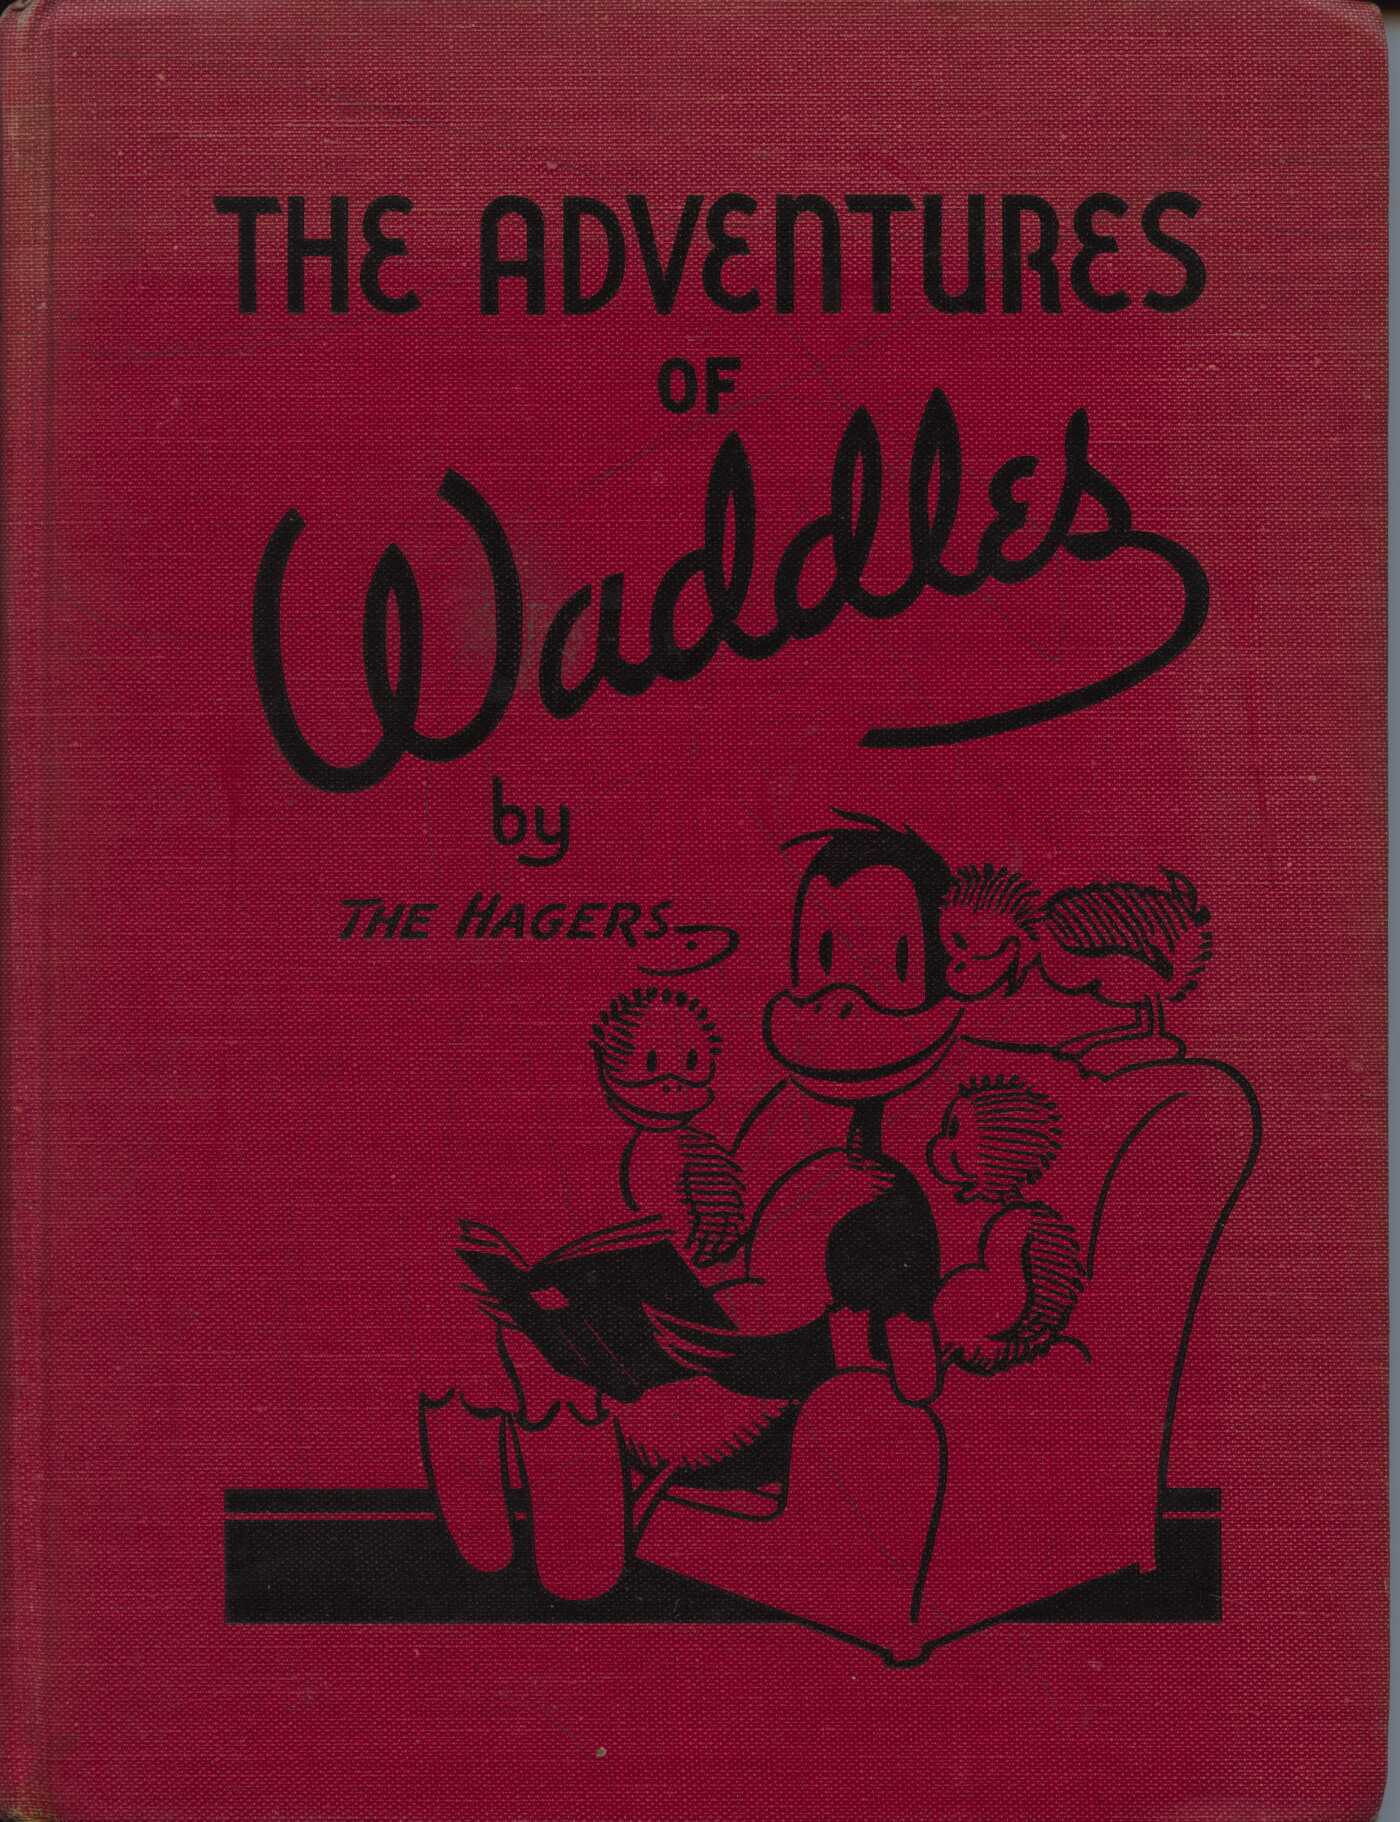 The Adventures of Waddles